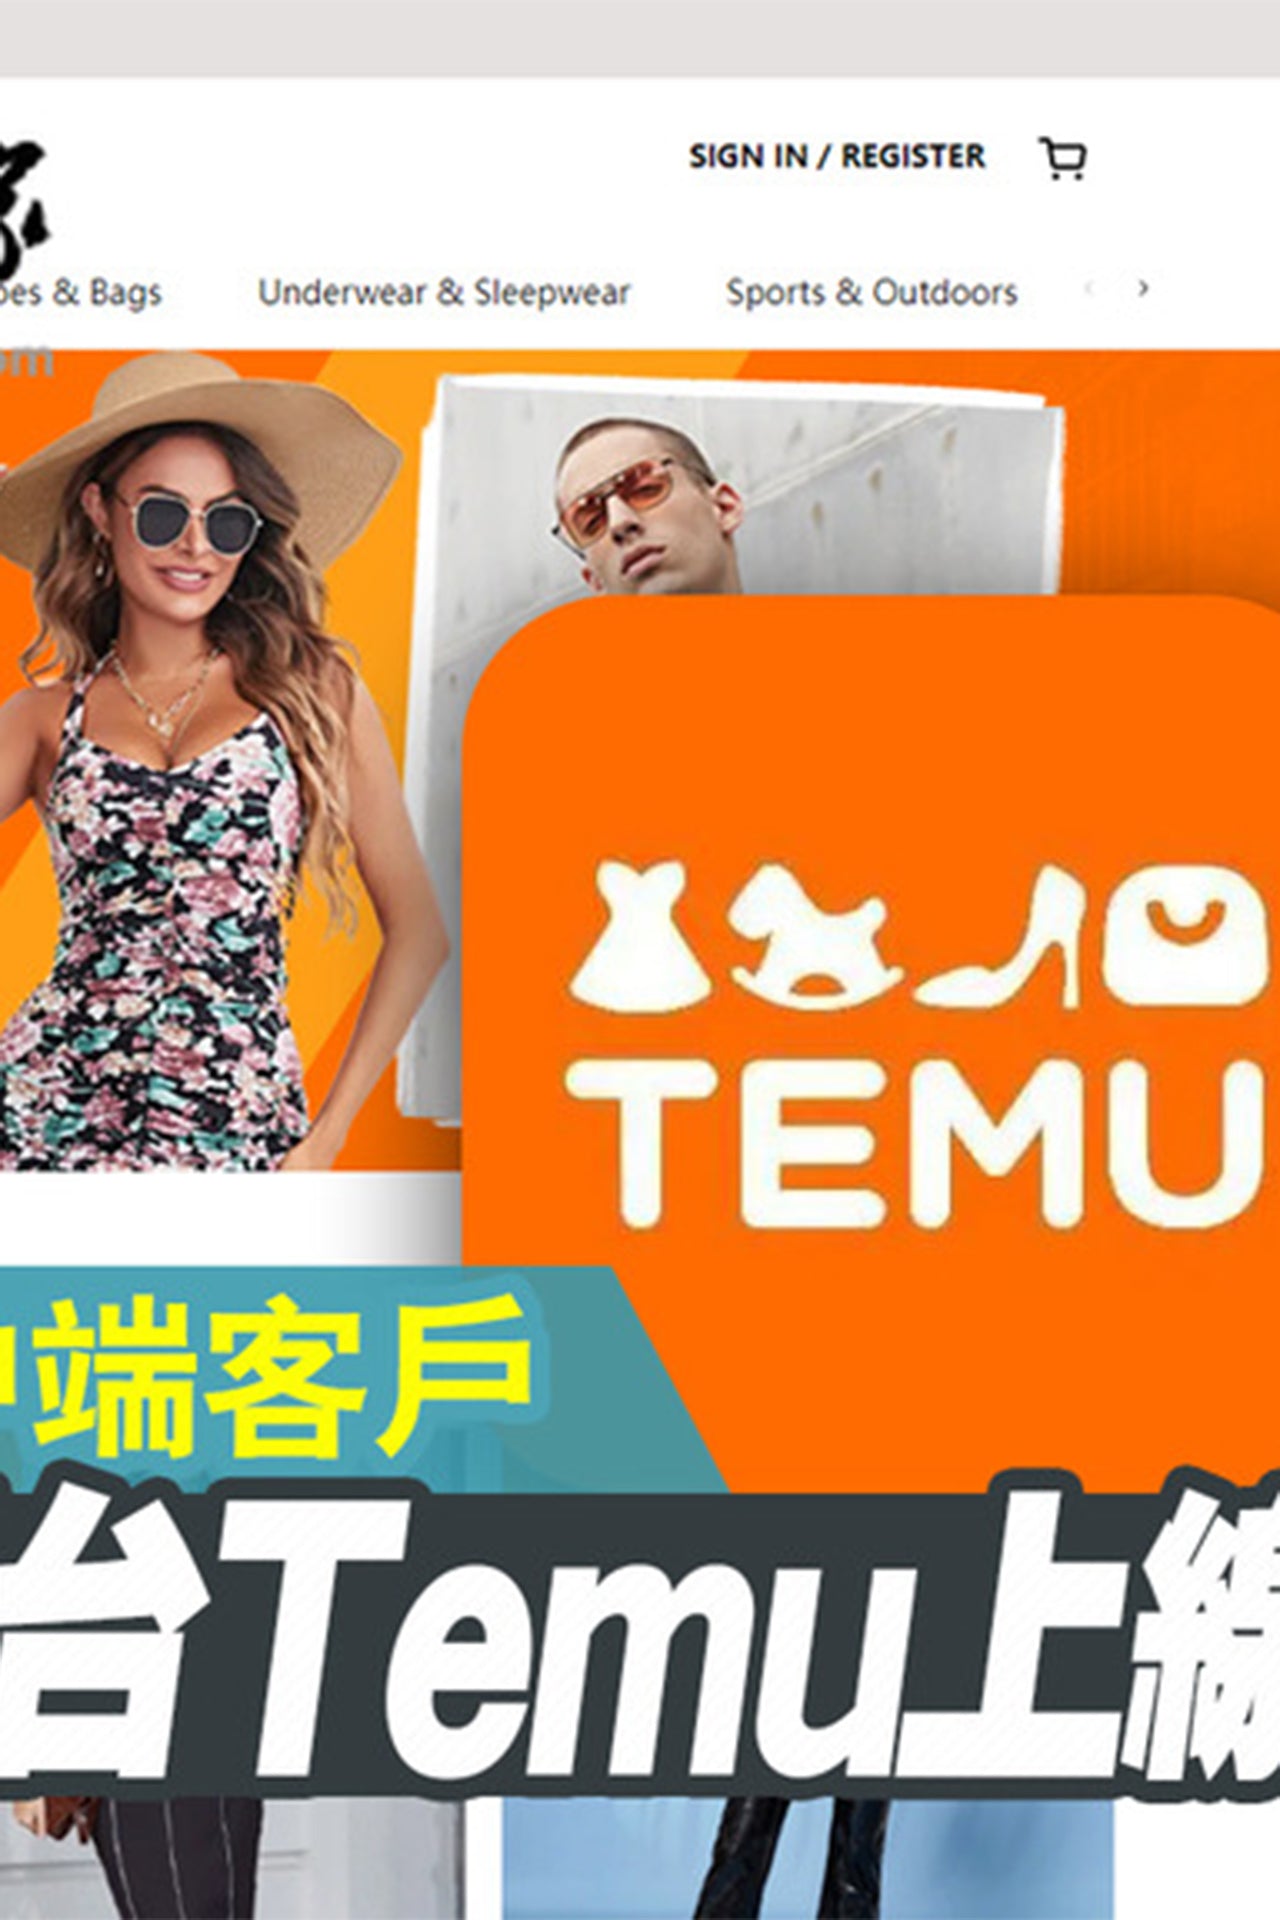 The cost of Shein and Temu's low prices